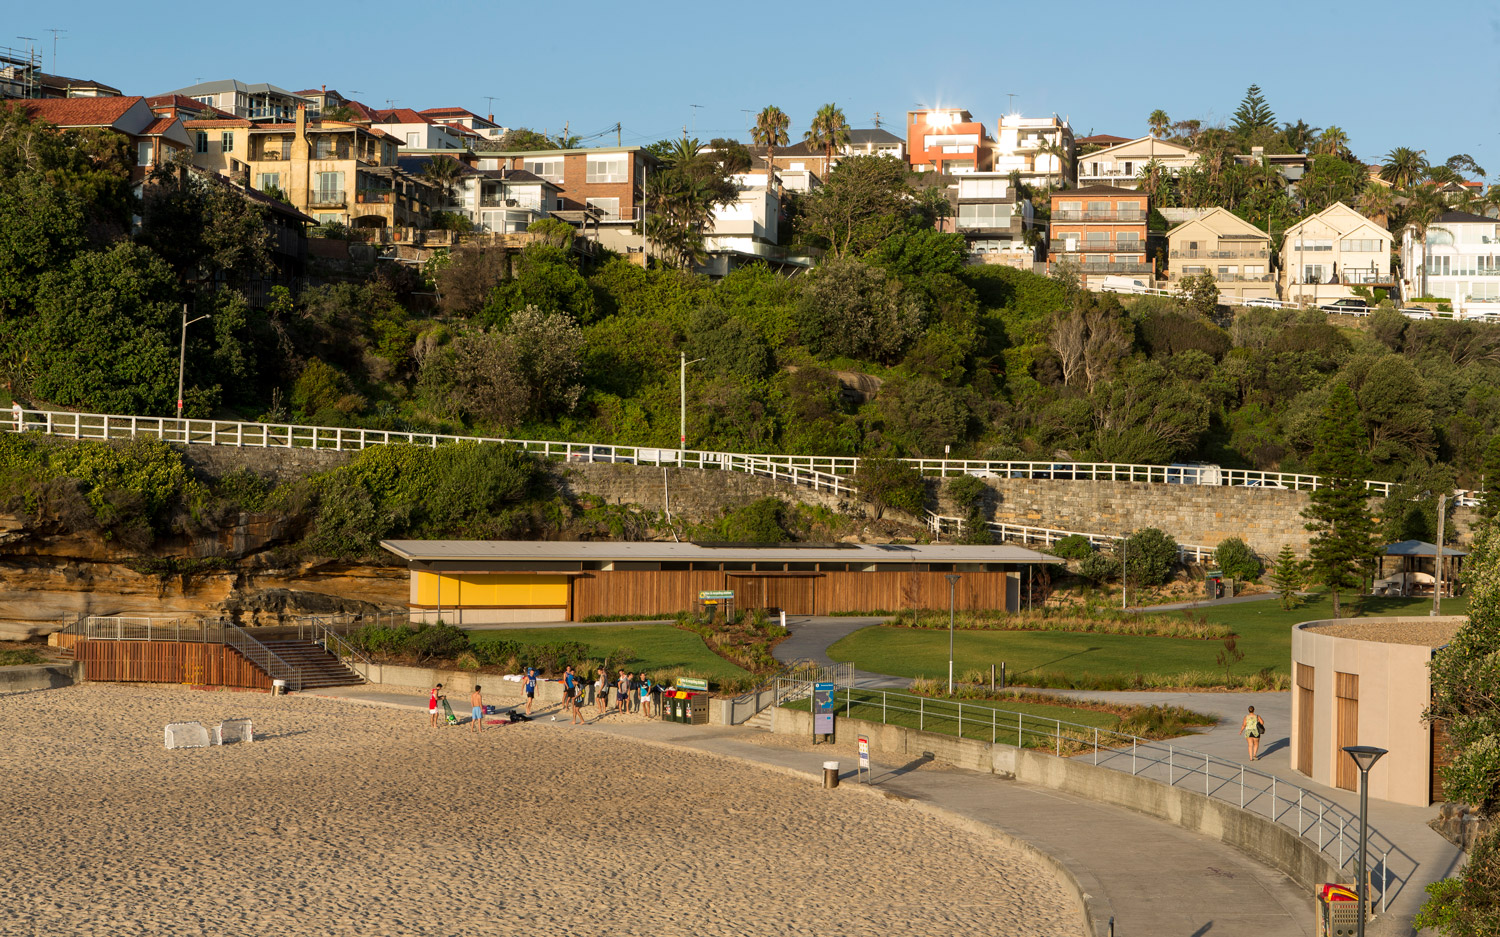 Tamarama Kiosk And Services Building Lahznimmo Architects